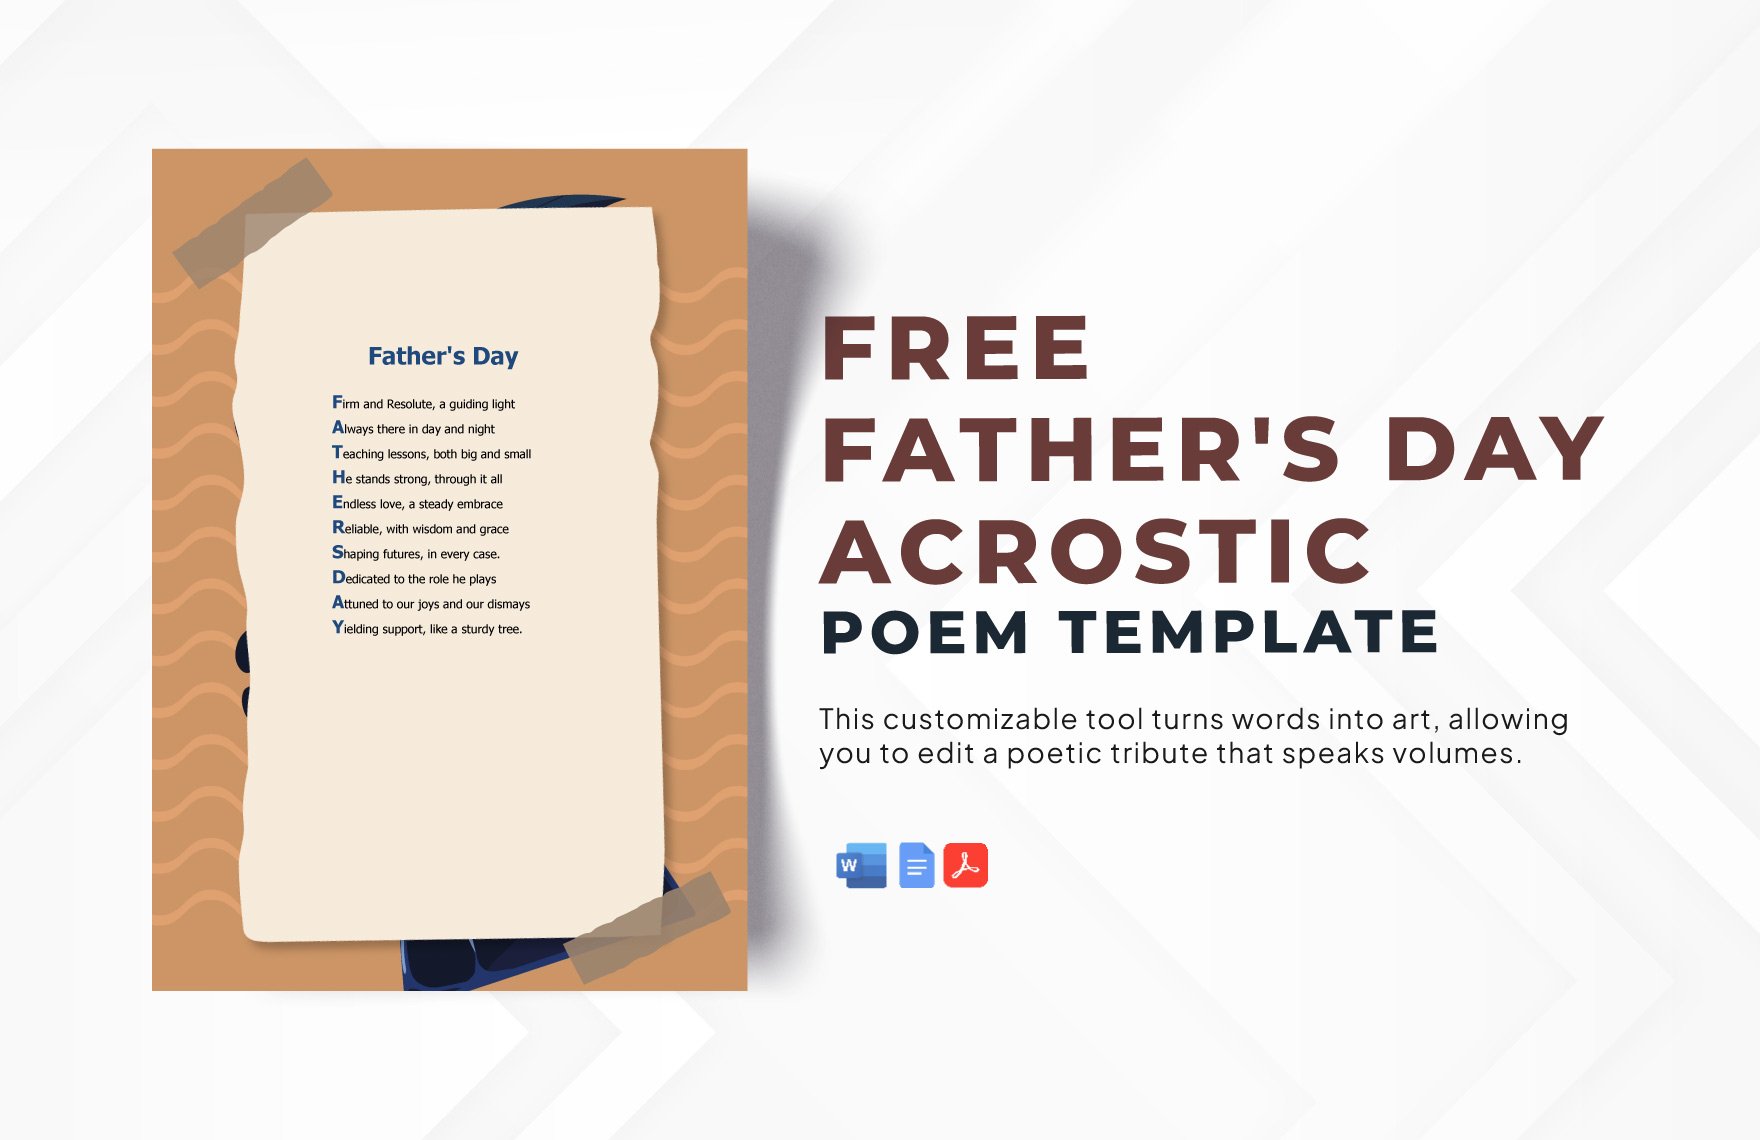 Free Father's Day Acrostic Poem Template